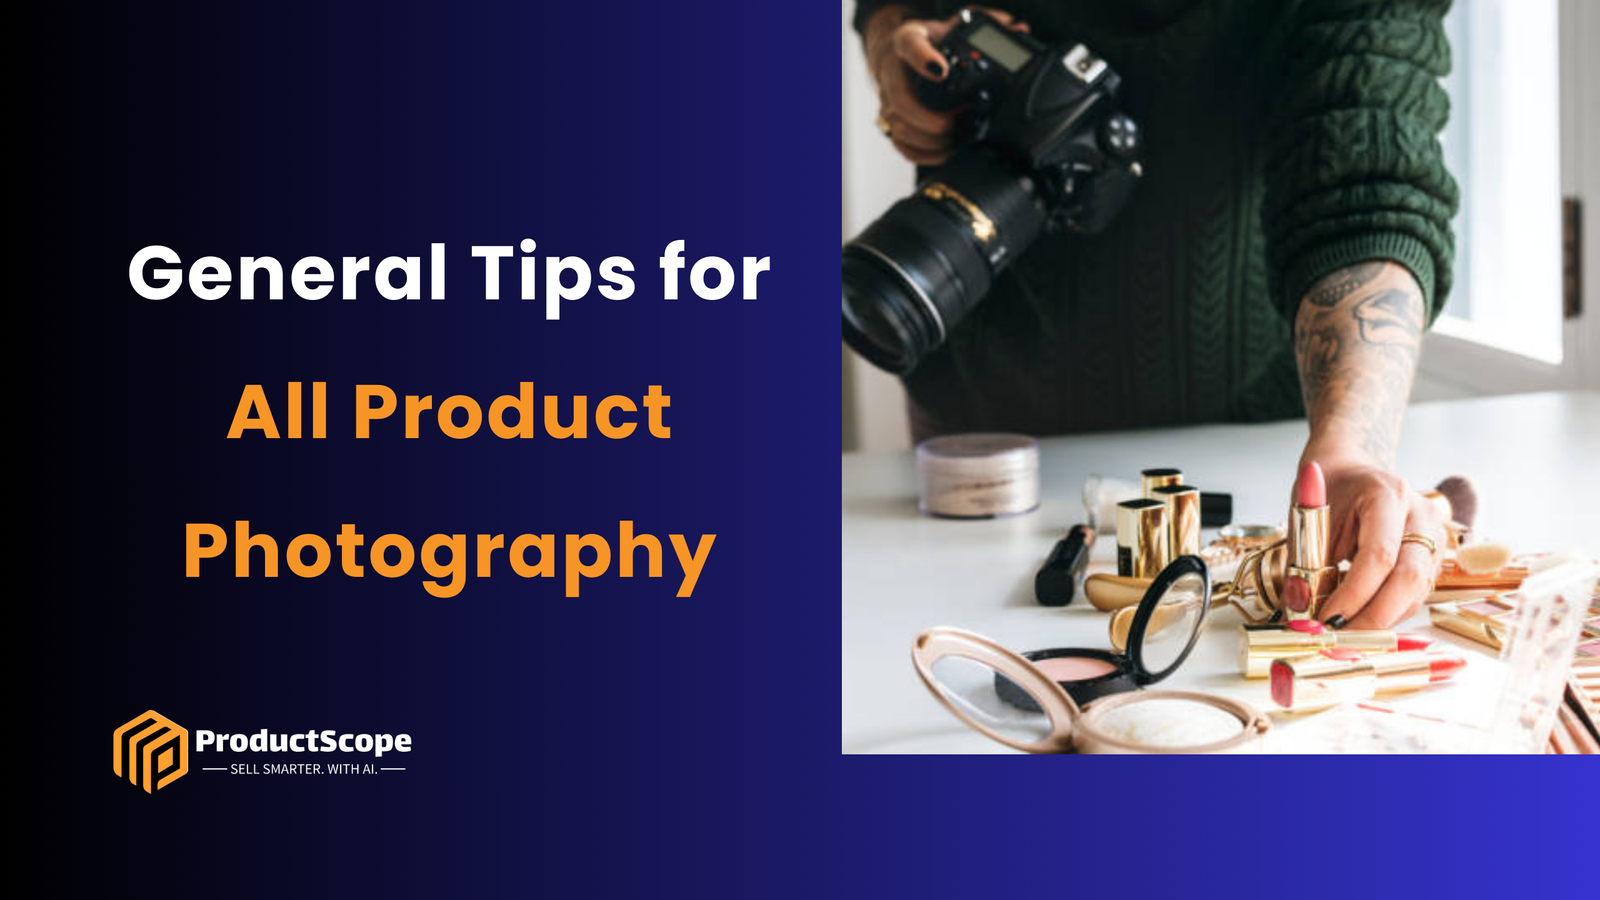 General Tips for All Product Photography